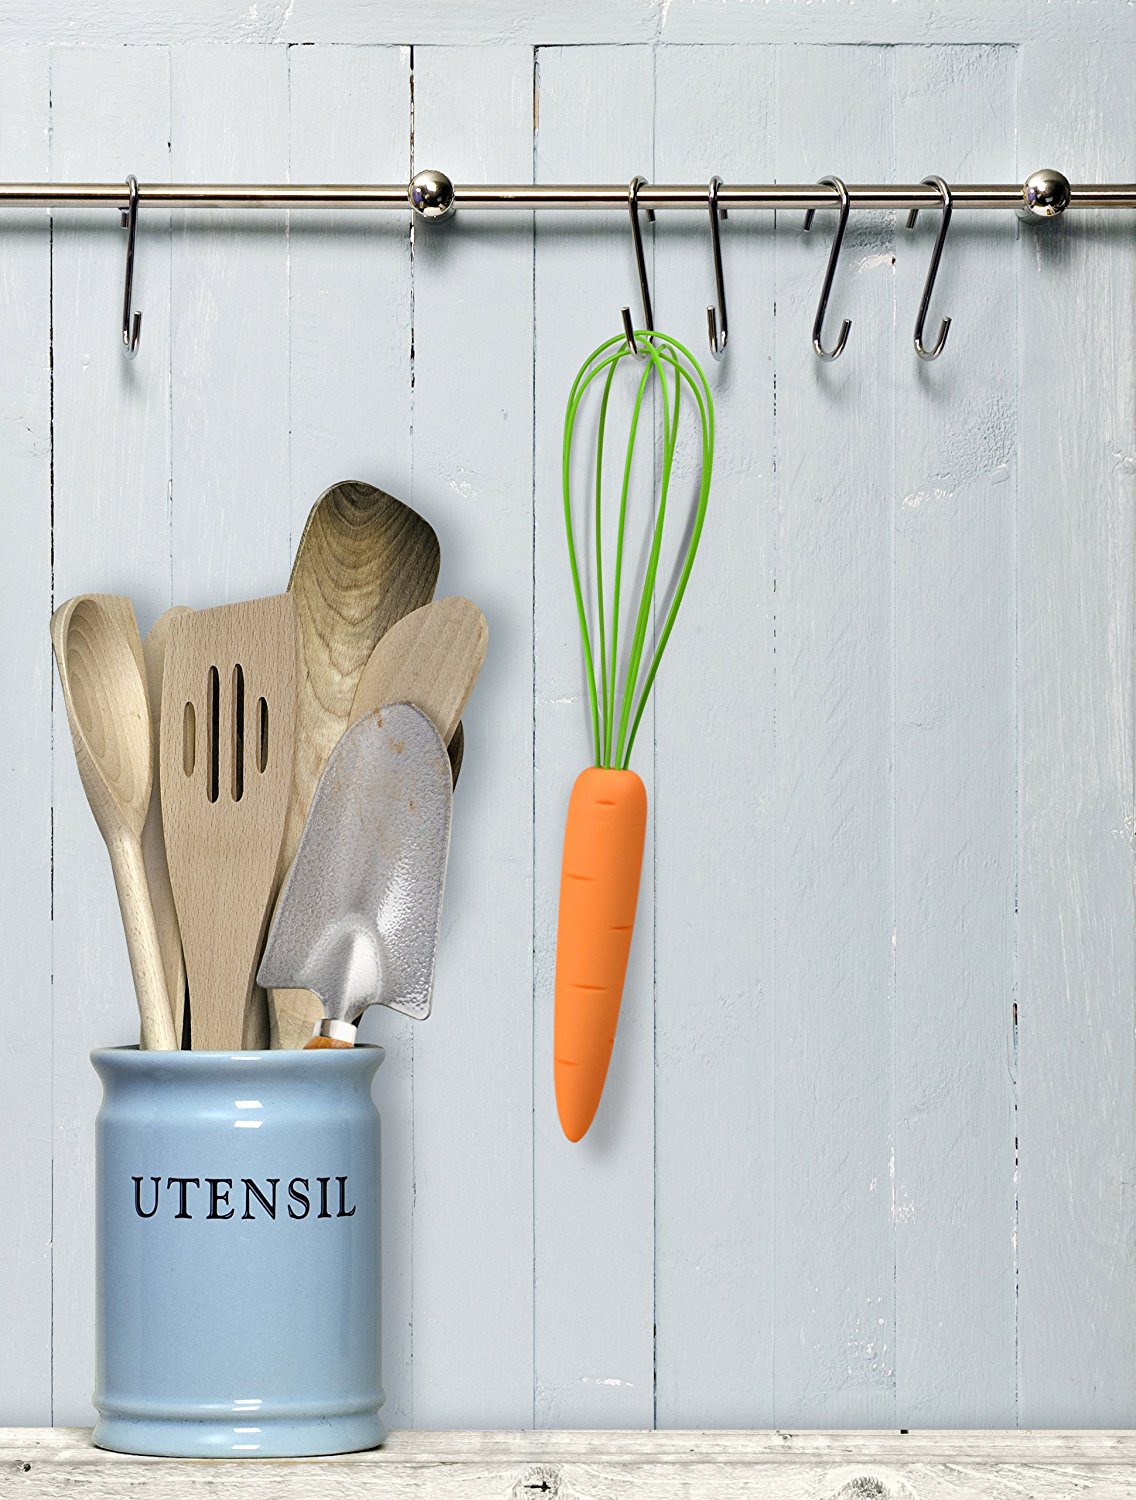 Cute carrot whisk reminds you cooking is meant to be fun